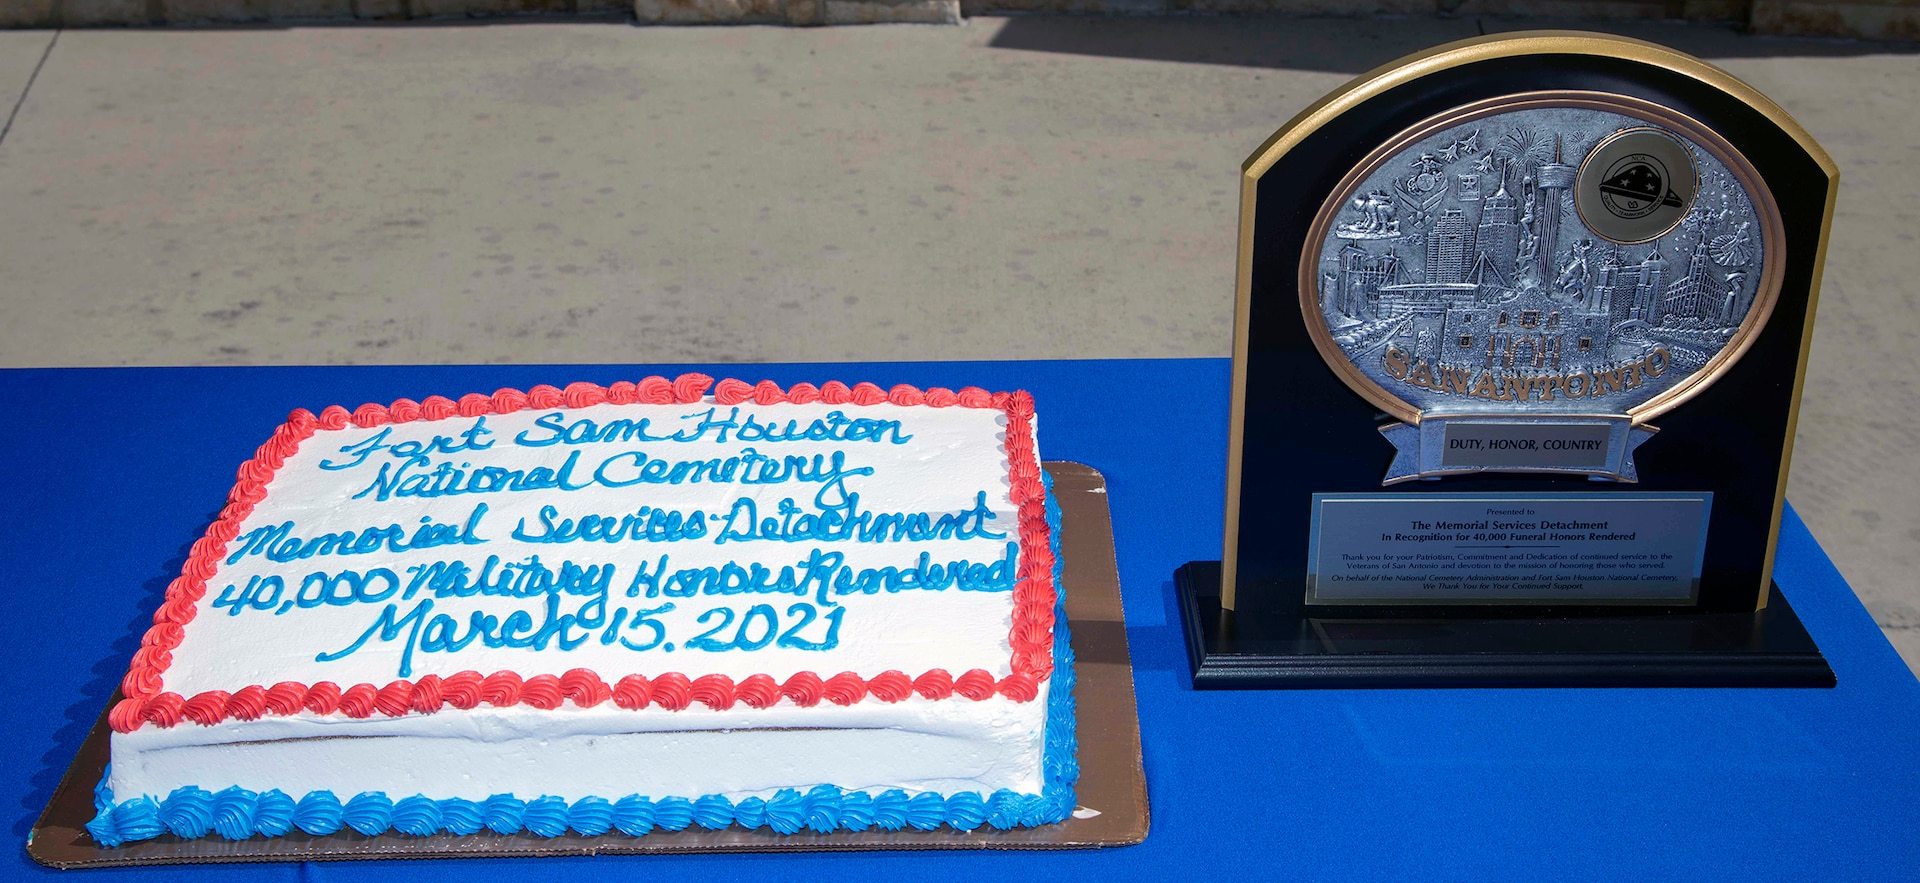 A cake and plaque sit on a table during a ceremony at the Fort Sam Houston National Cemetery in San Antonio March 15. The plaque was given to the detachment to commemorate their 40,000th funeral service.